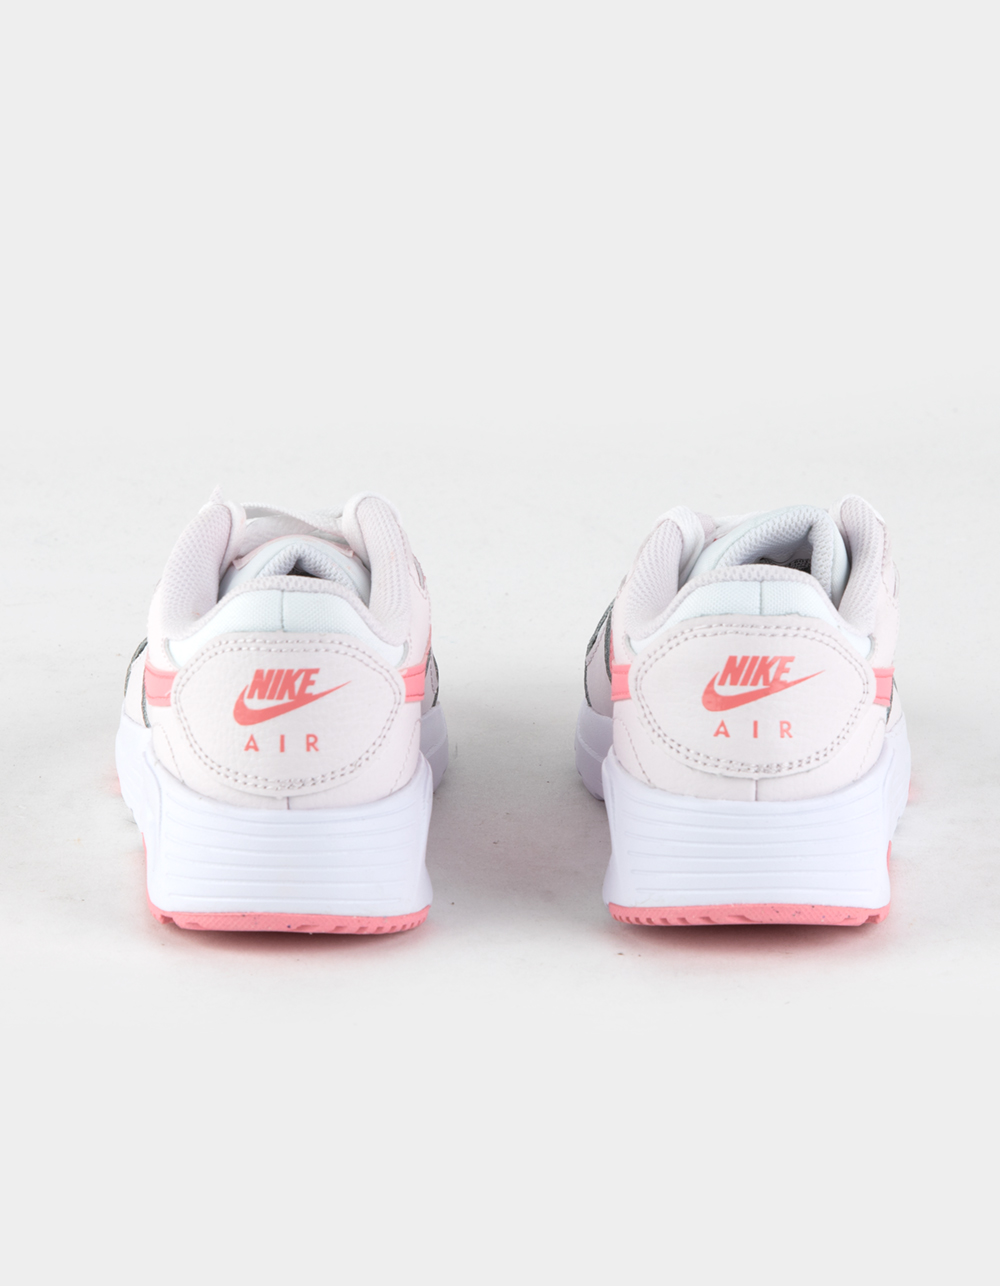 NIKE Air Max SC Womens Shoes - WHT/PNK | Tillys